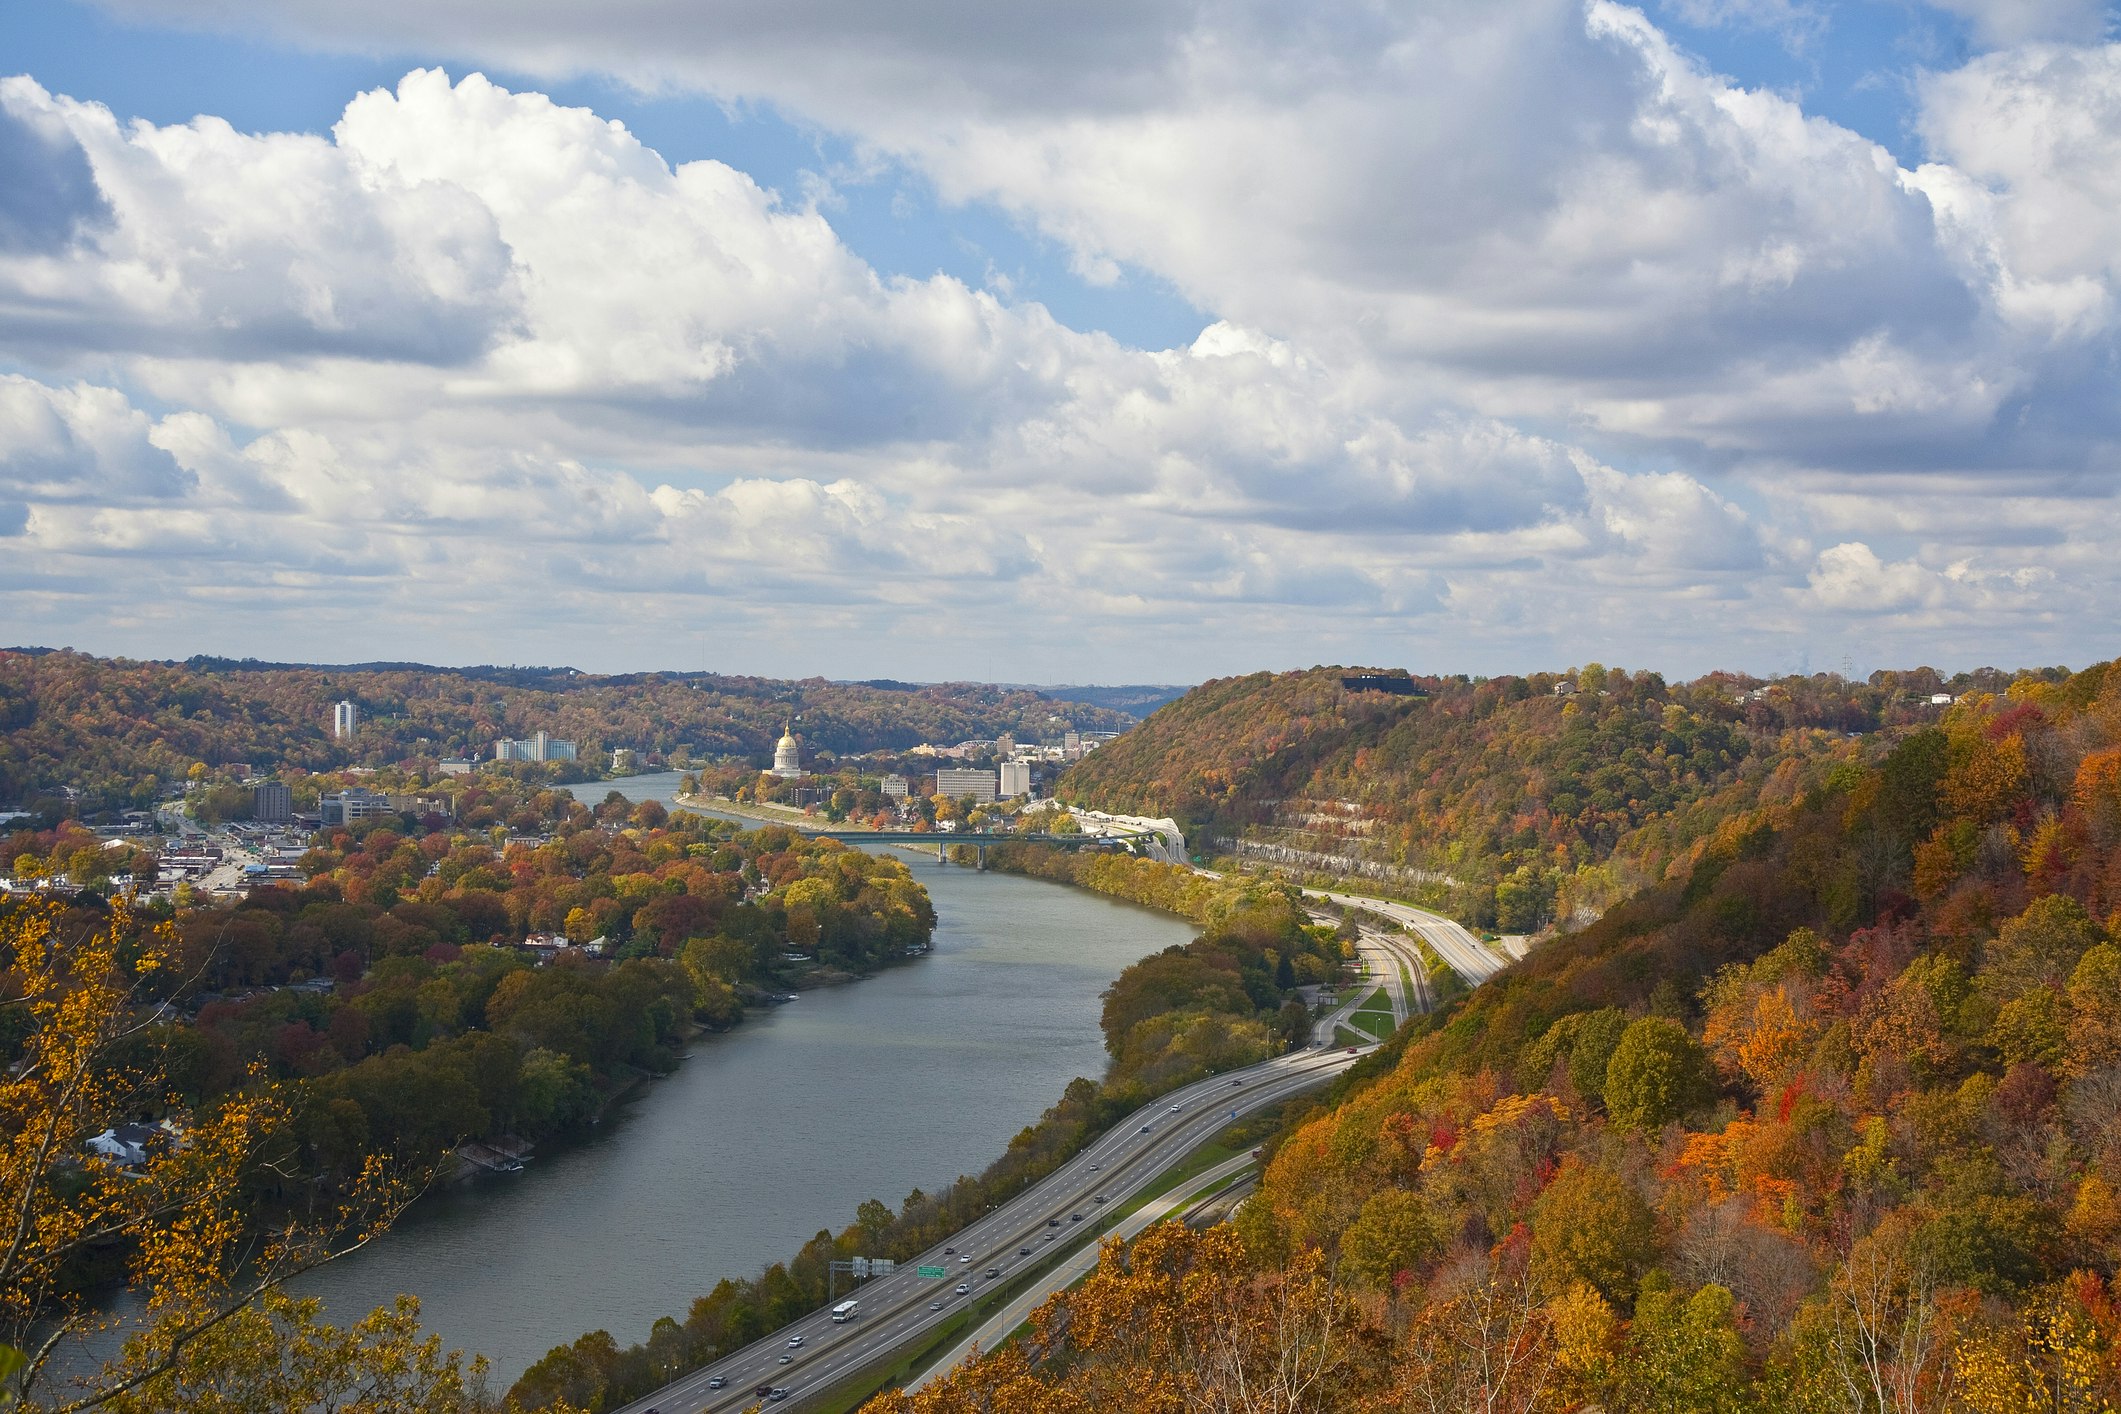 A view of downtown Charleston from a distance, shot from up the Kanawha River when the hollsides surrounding the highway and town are covered in bright autumn leaves